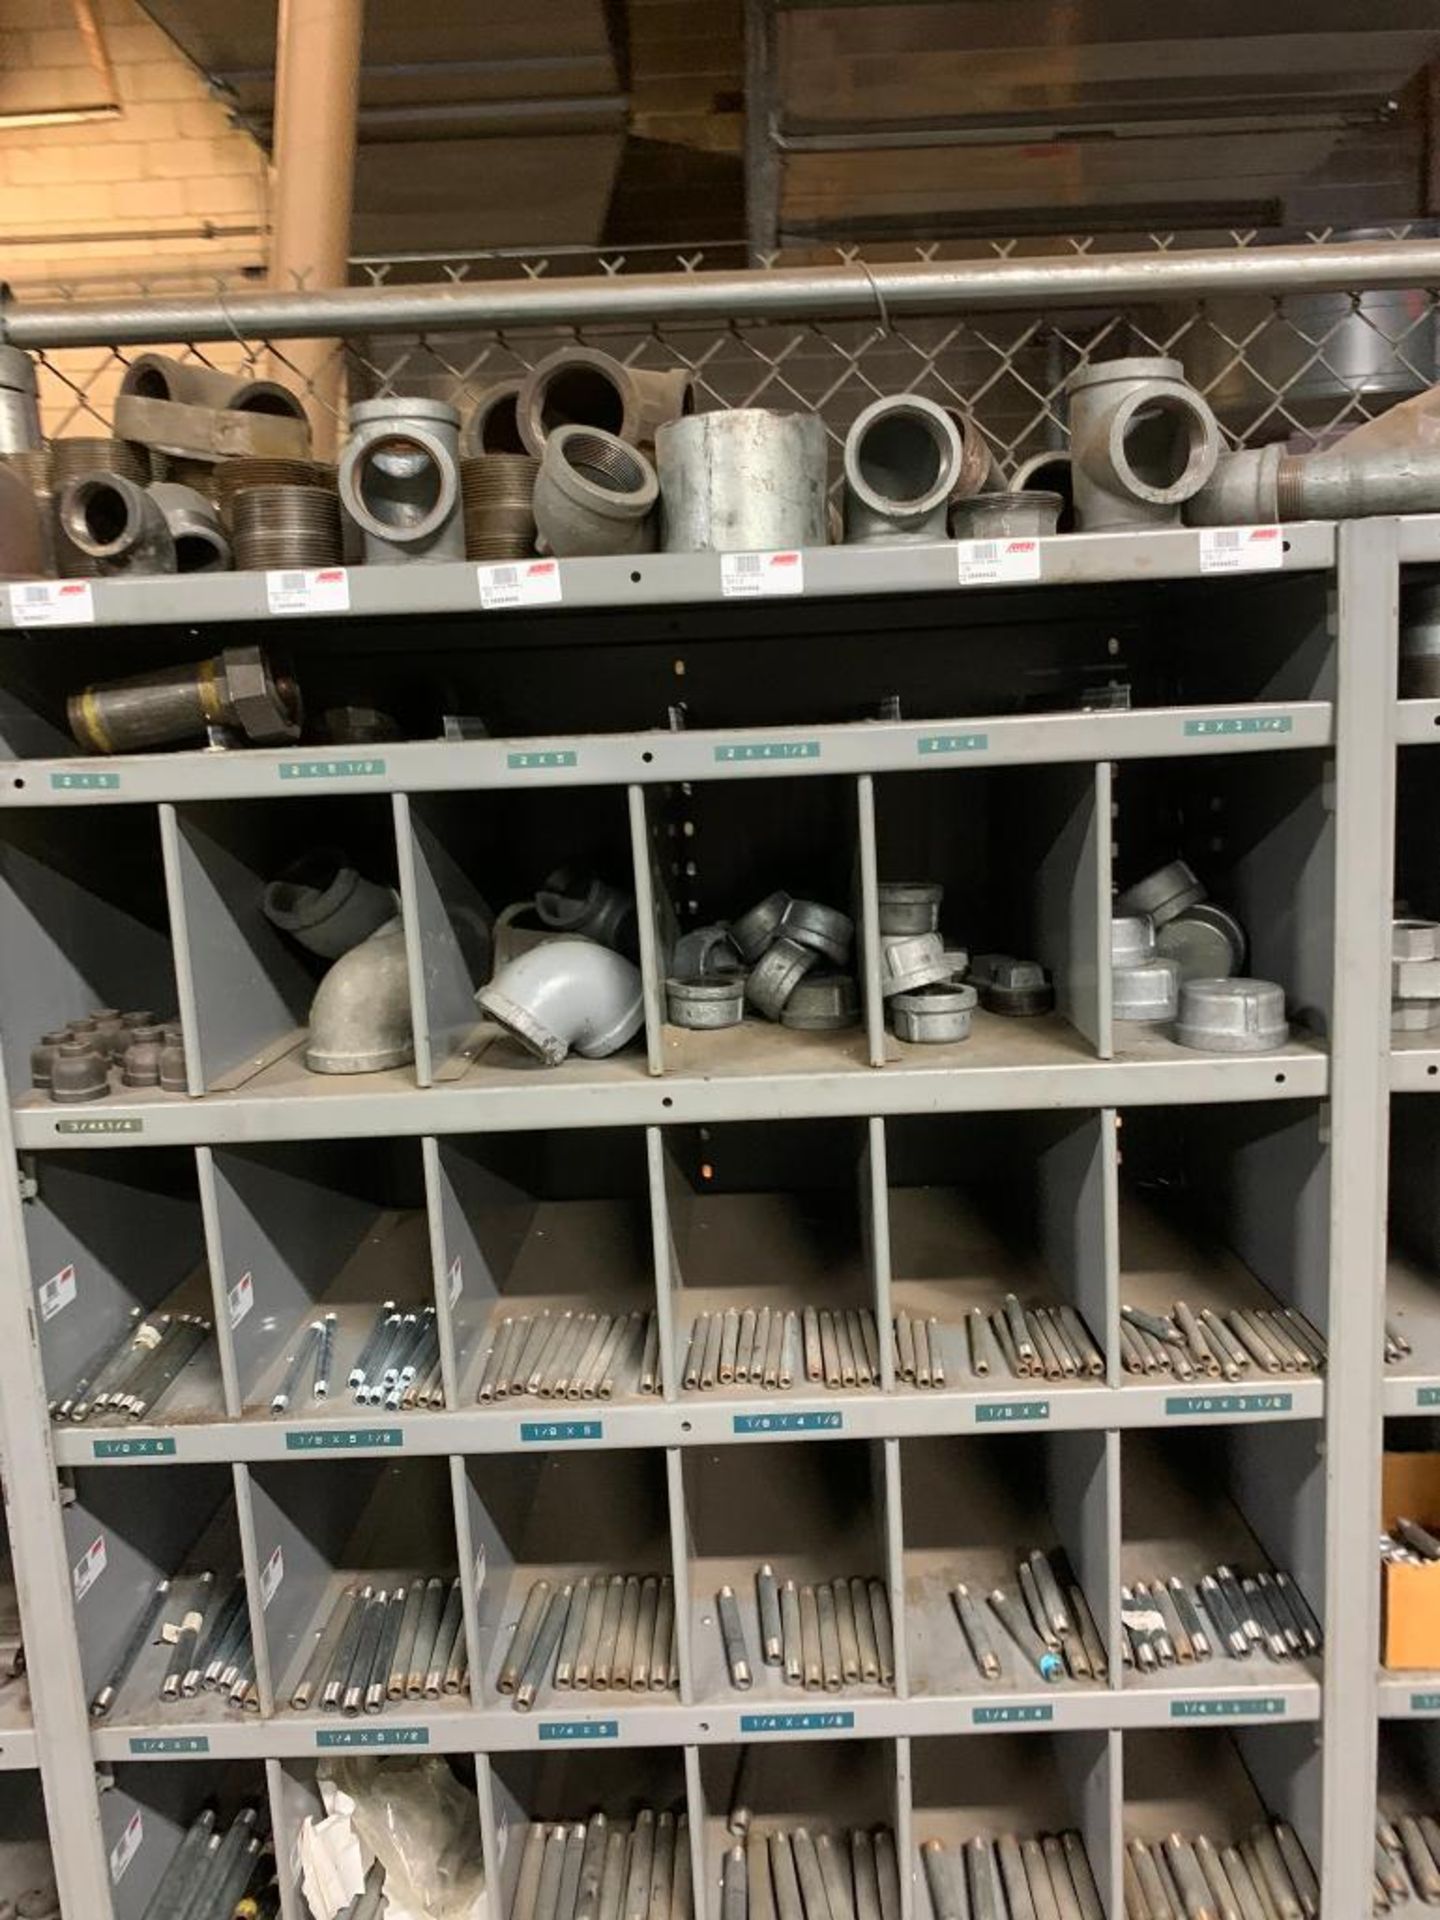 (10x) Bays of Assorted Shelving w/ Pipe Fittings, Pipe Nipples, Elbows, Connectors, Tees, Hardware - Image 5 of 21